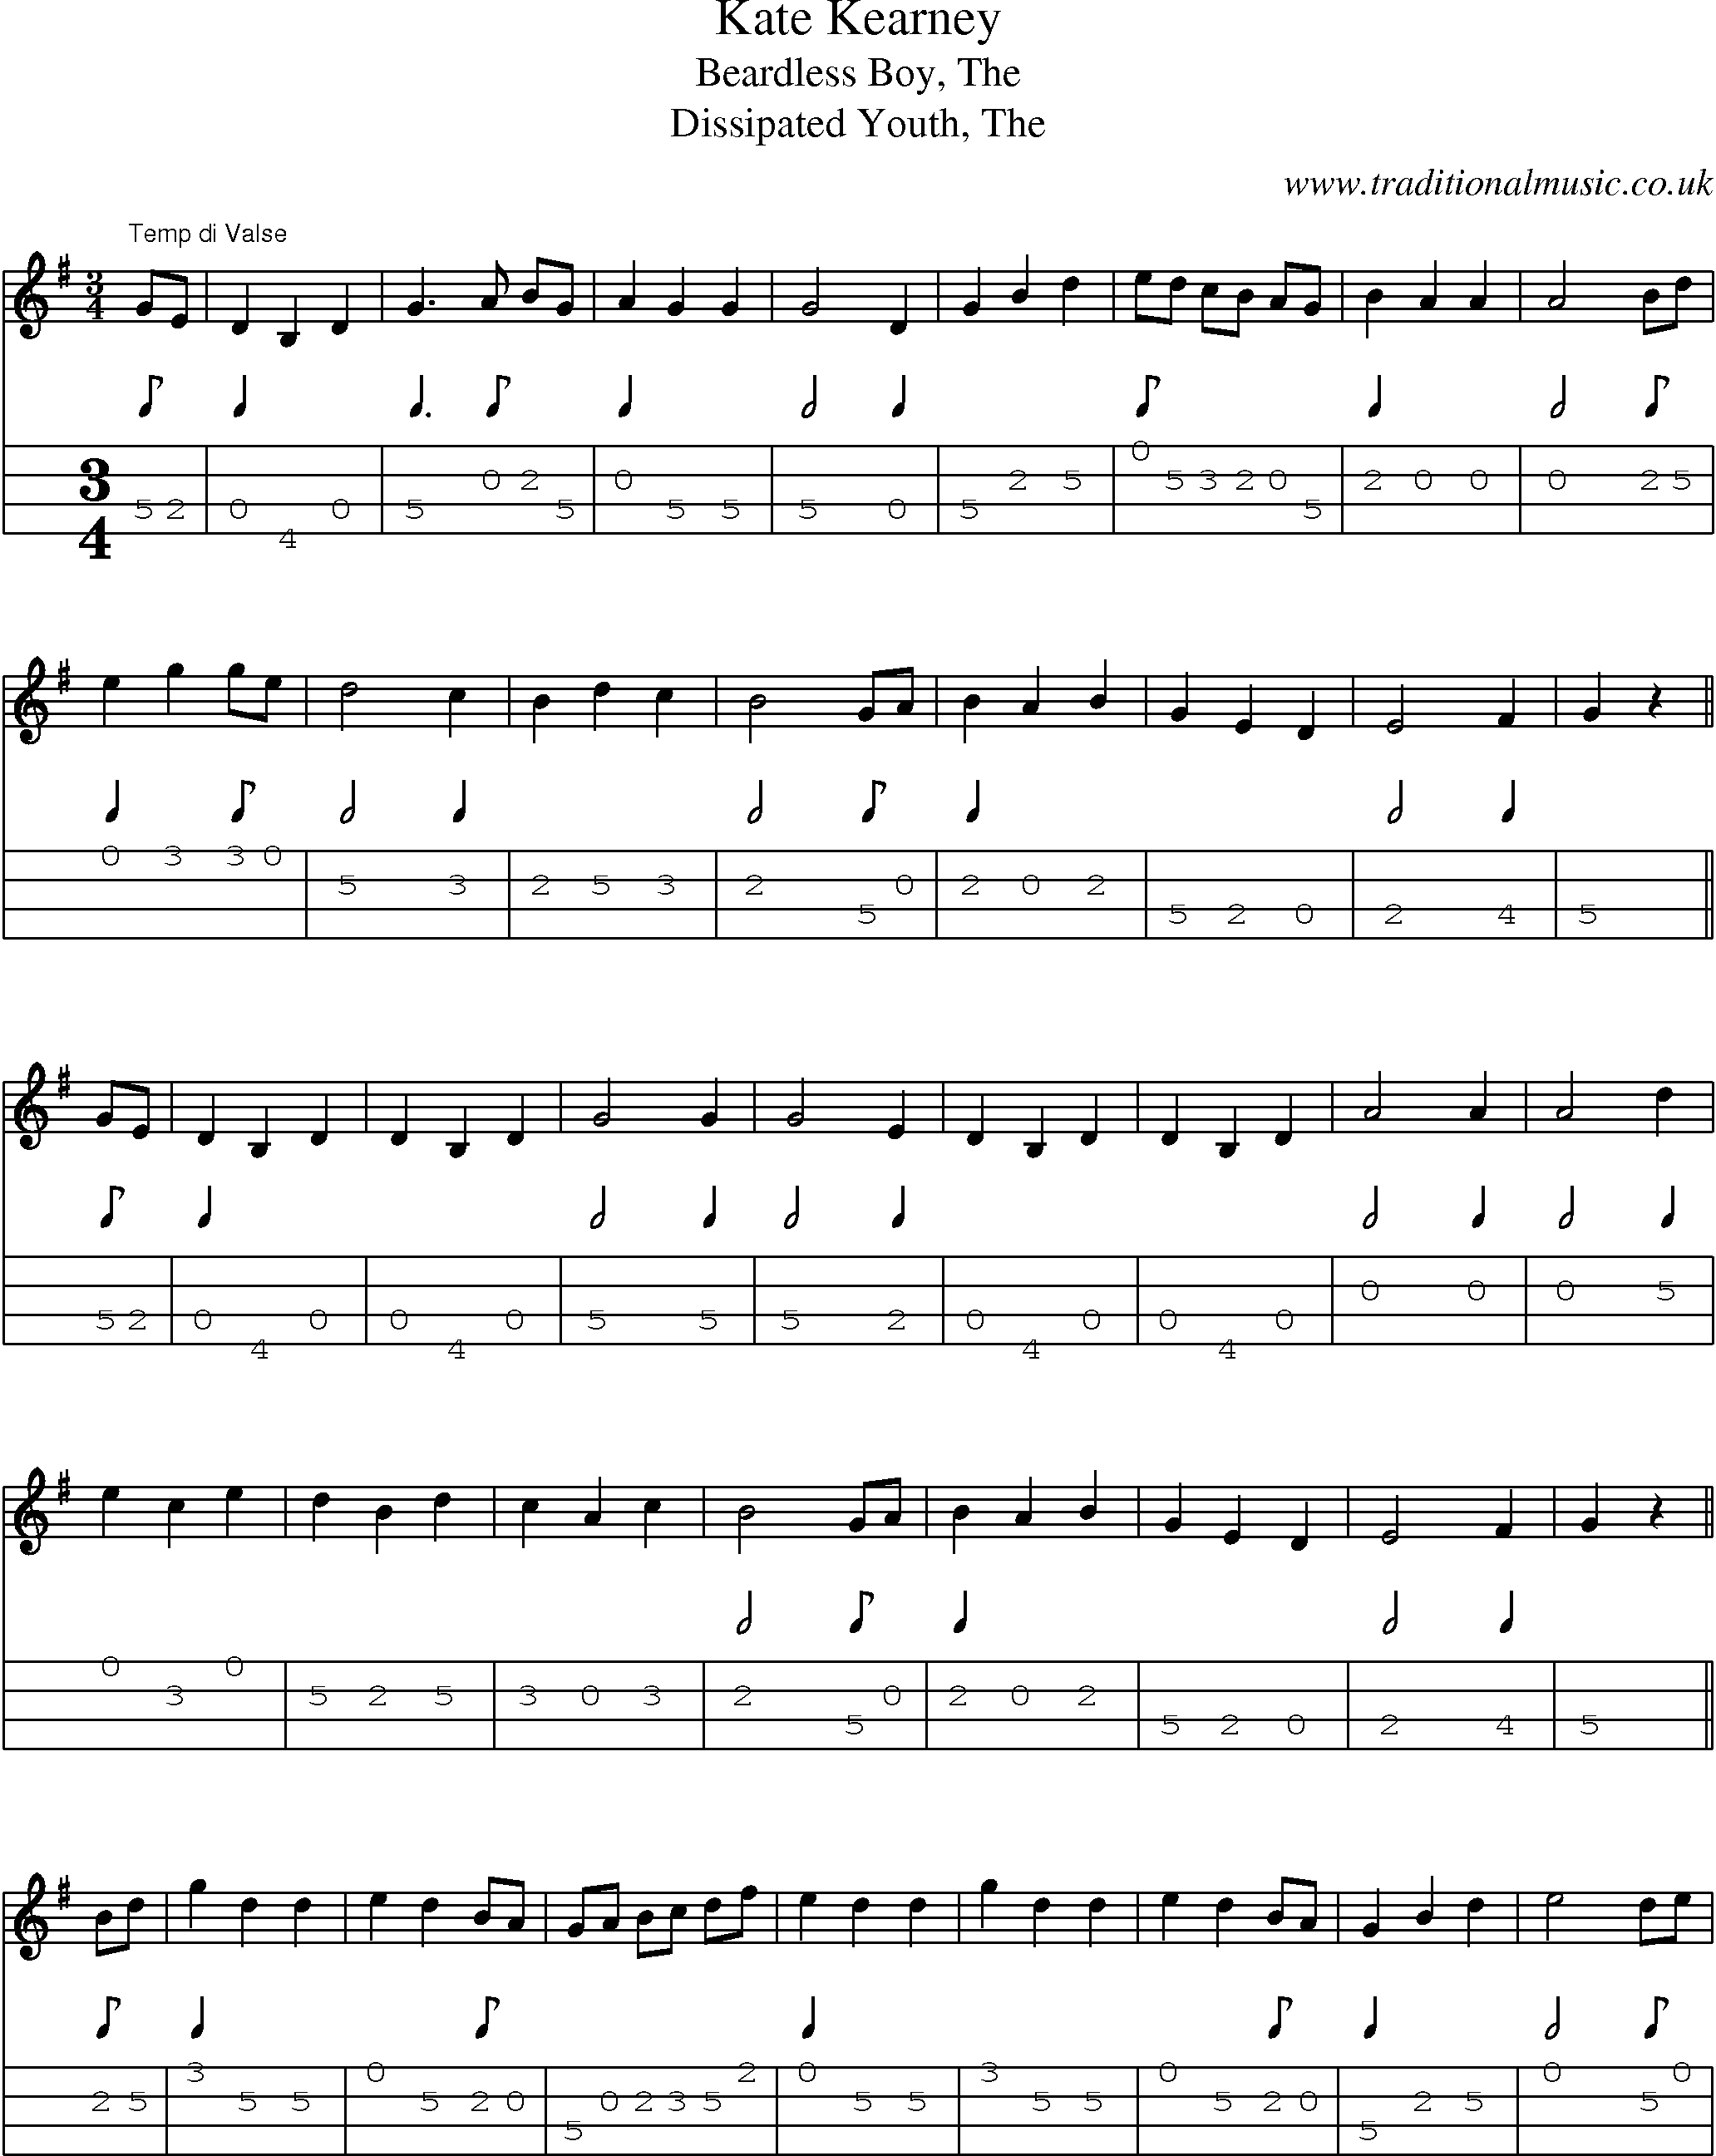 Music Score and Mandolin Tabs for Kate Kearney